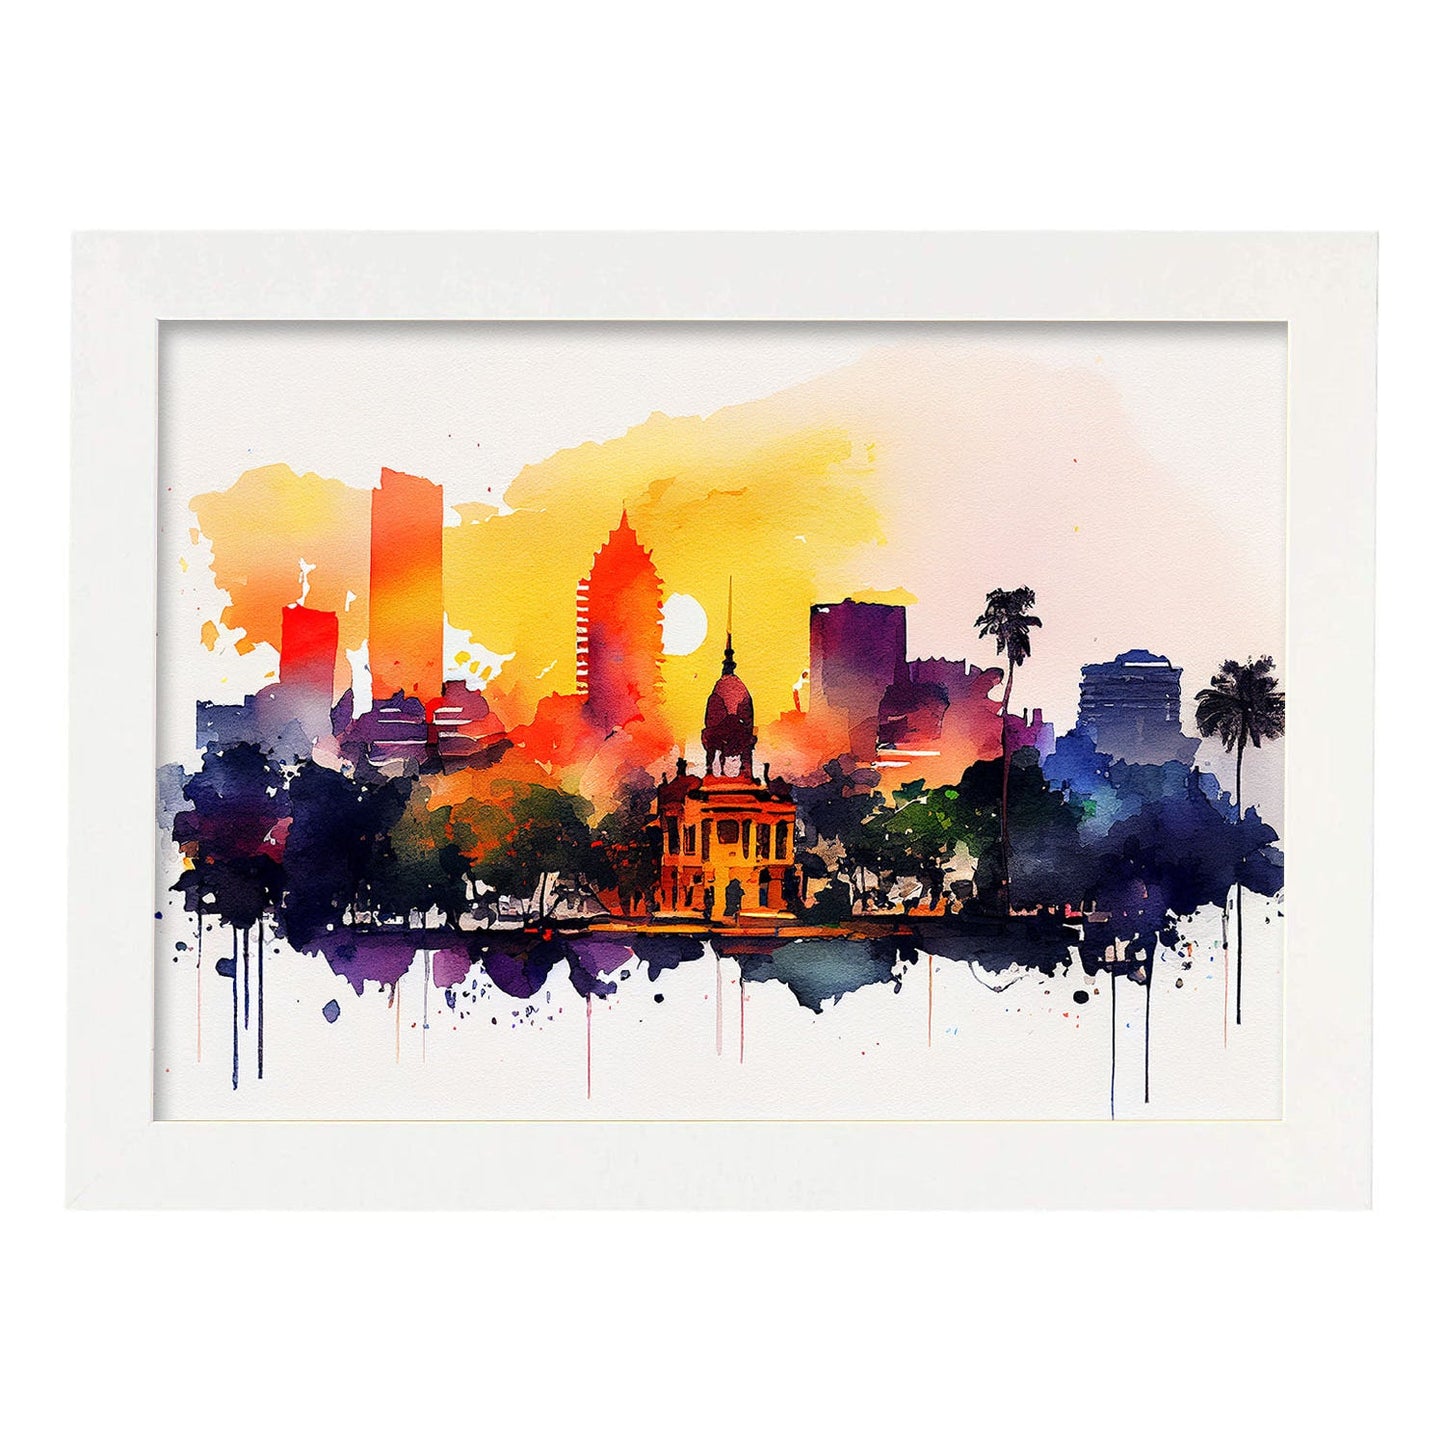 Nacnic watercolor of a skyline of the city of Hanoi_1. Aesthetic Wall Art Prints for Bedroom or Living Room Design.-Artwork-Nacnic-A4-Marco Blanco-Nacnic Estudio SL